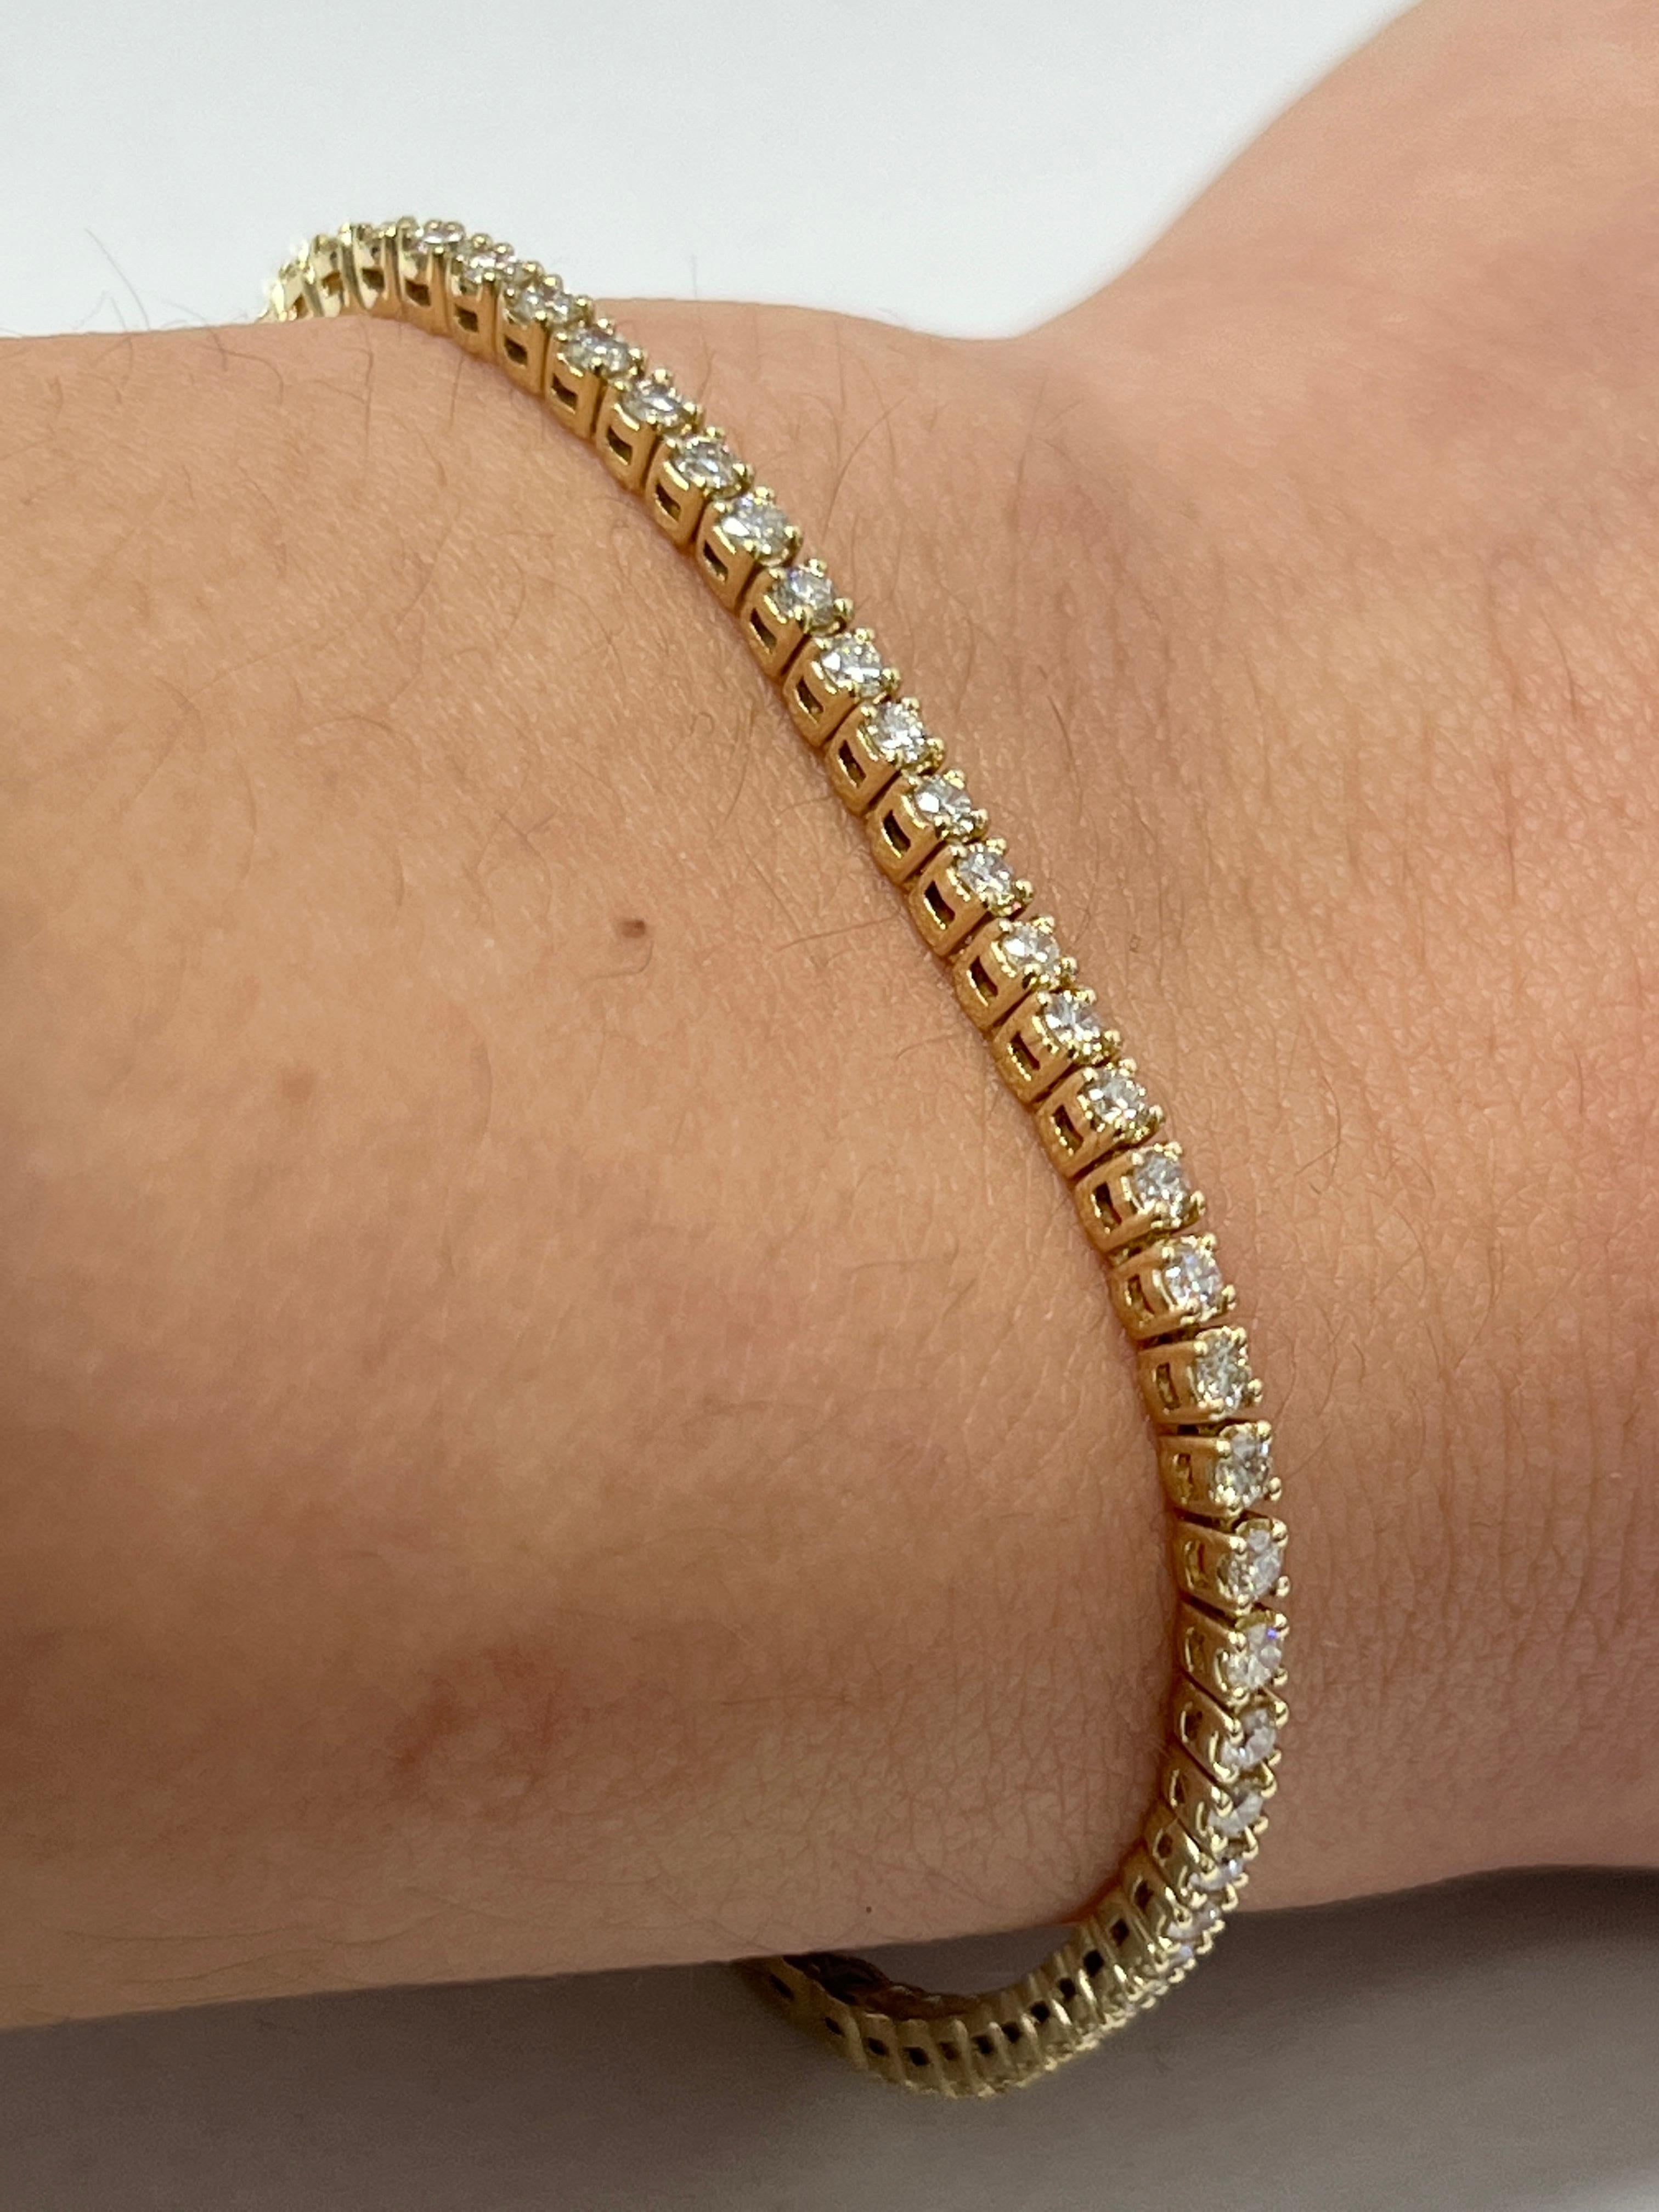 Fashion and glam are at the forefront with this exquisite diamond bracelet. This 14-karat yellow gold diamond bracelet is made from 8 grams of gold. The top is adorned with one row of I-J color, VS/SI clarity diamonds. This bracelet carries 77 round